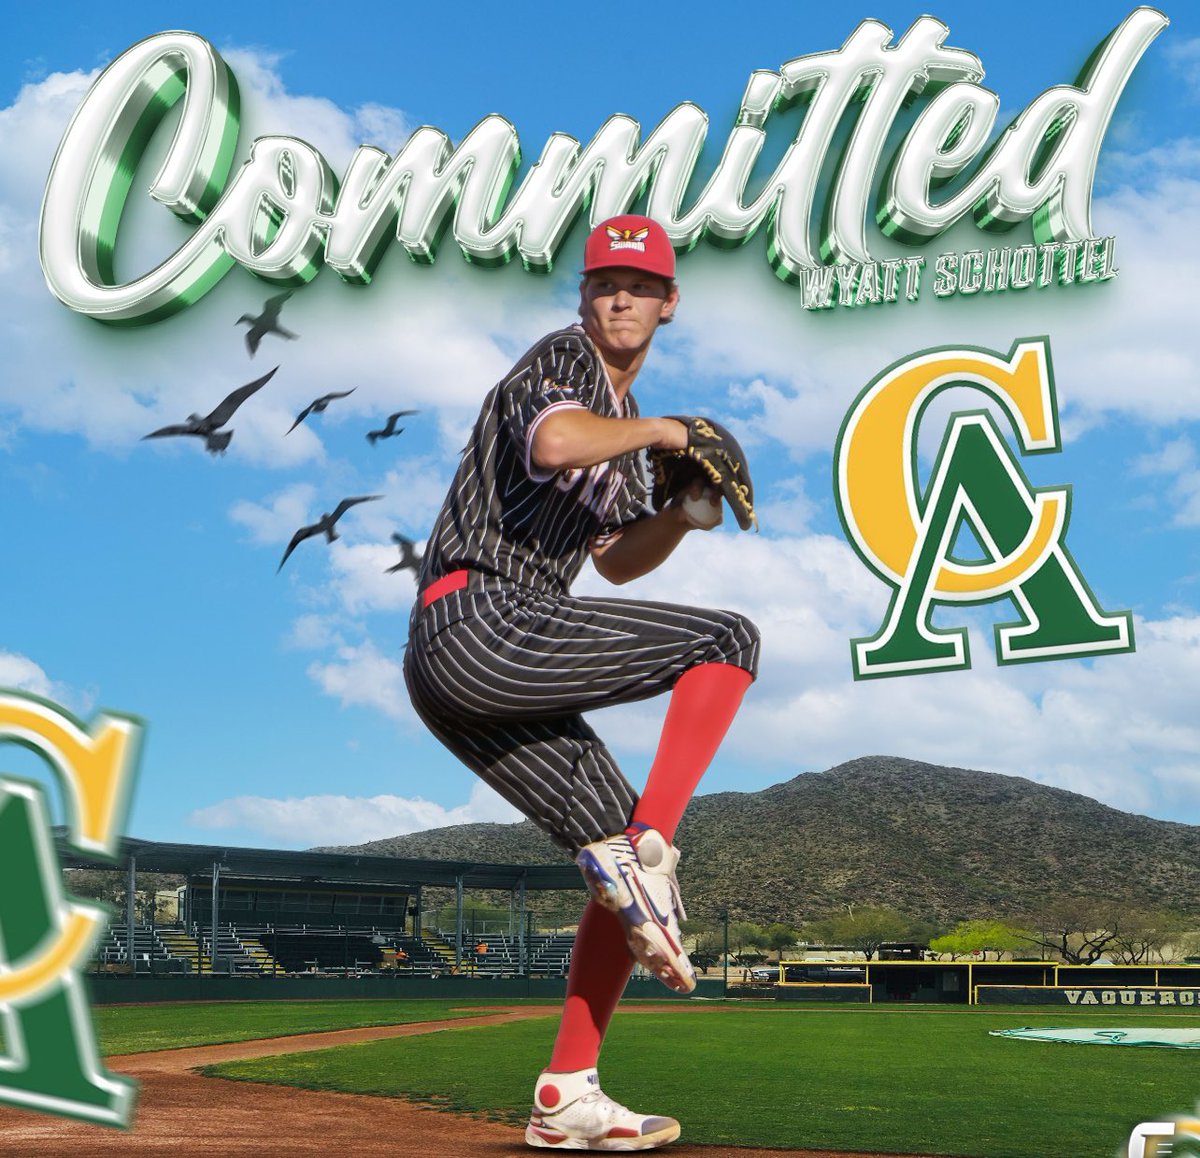 I am extremely excited to announce my commitment to Central Arizona. I would like to thank God, my family, and all of my coaches for helping get to where I am.